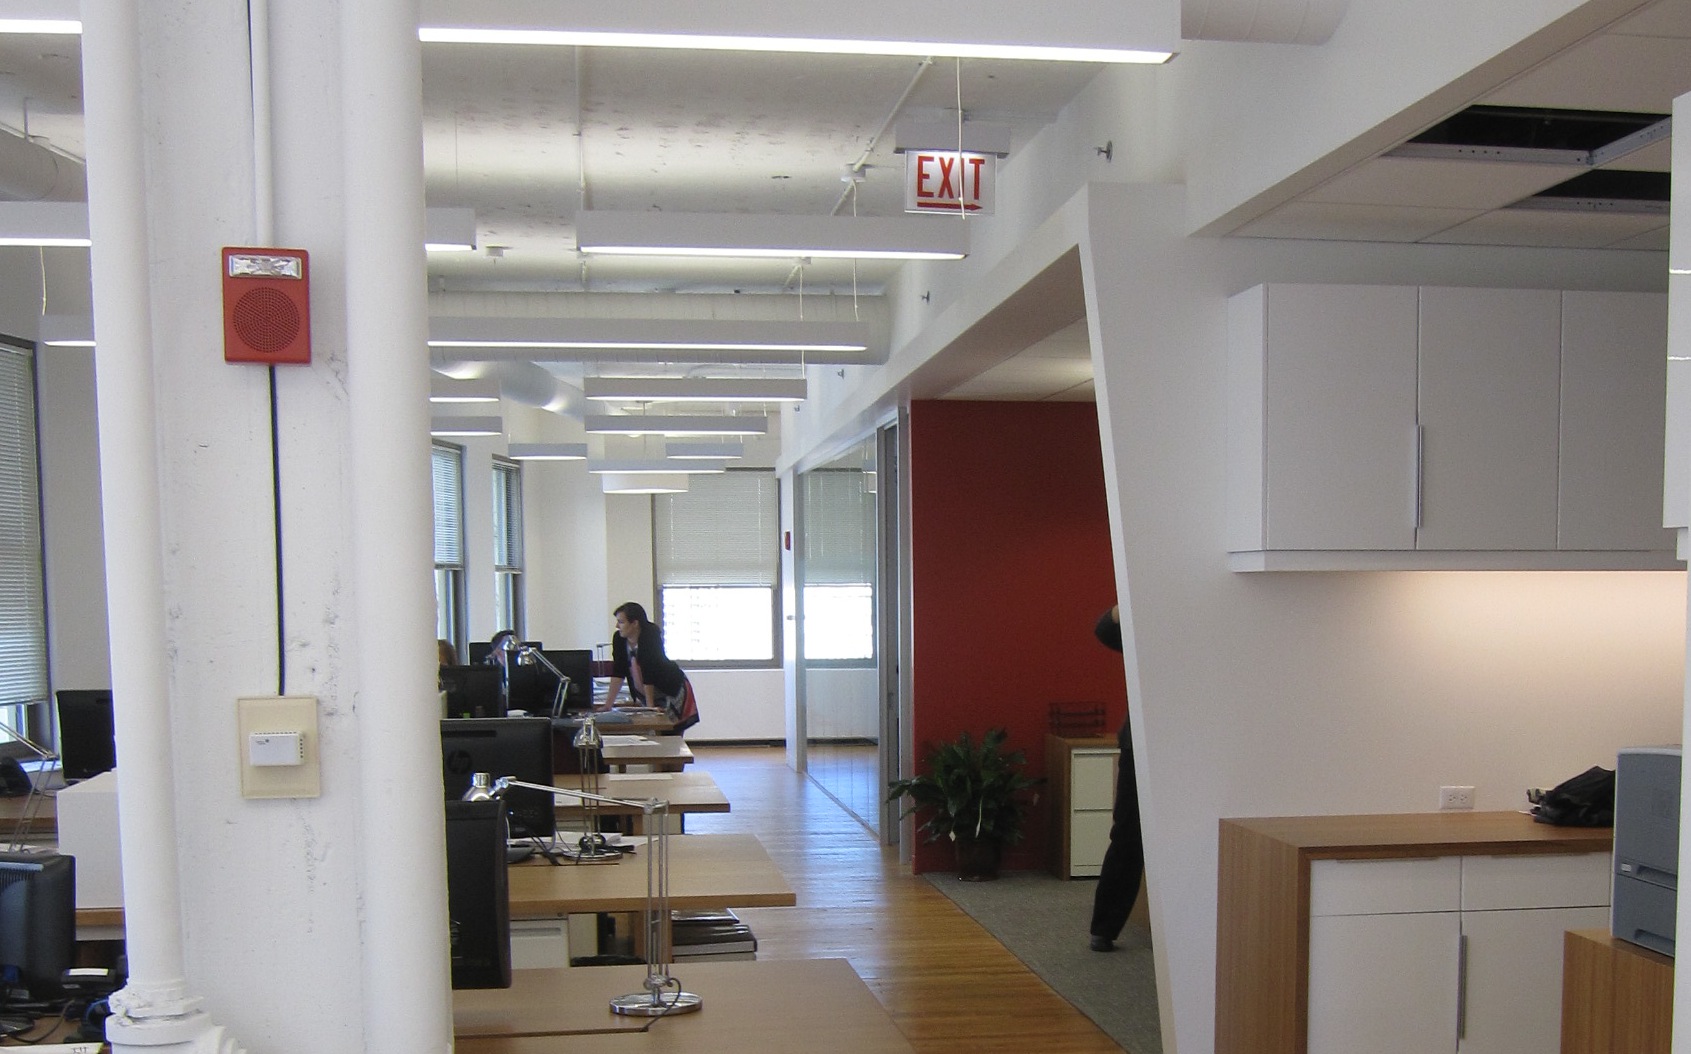 While the exposed ceiling look is popular in todays commercial office spaces, s